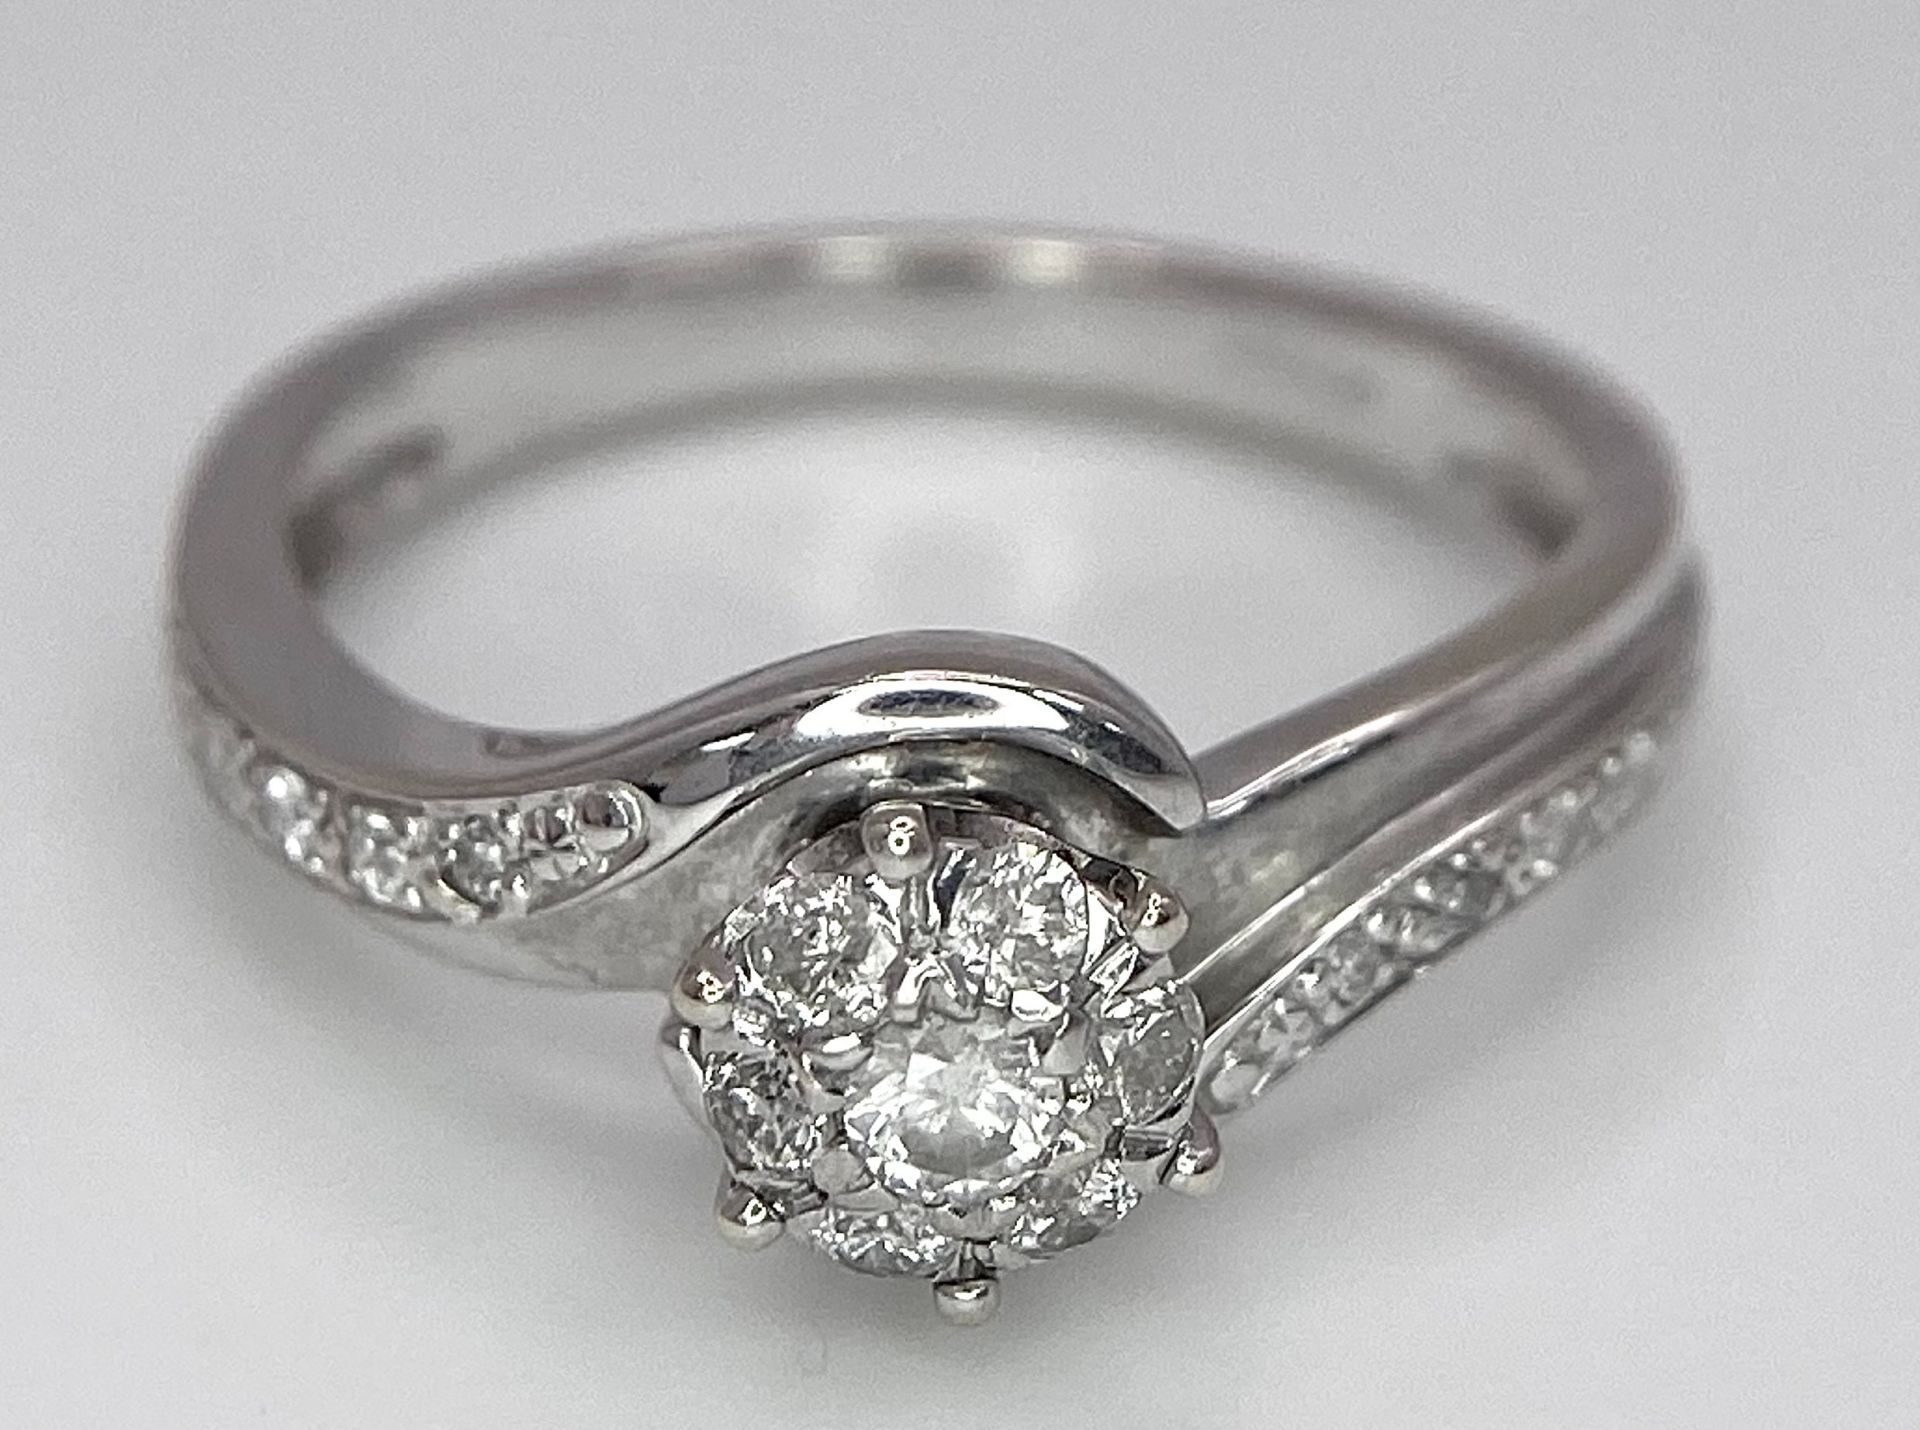 A 9K WHITE GOLD DIAMOND RING. 0.25ctw, Size L, 2.3g total weight. Ref: 8034 - Image 3 of 6